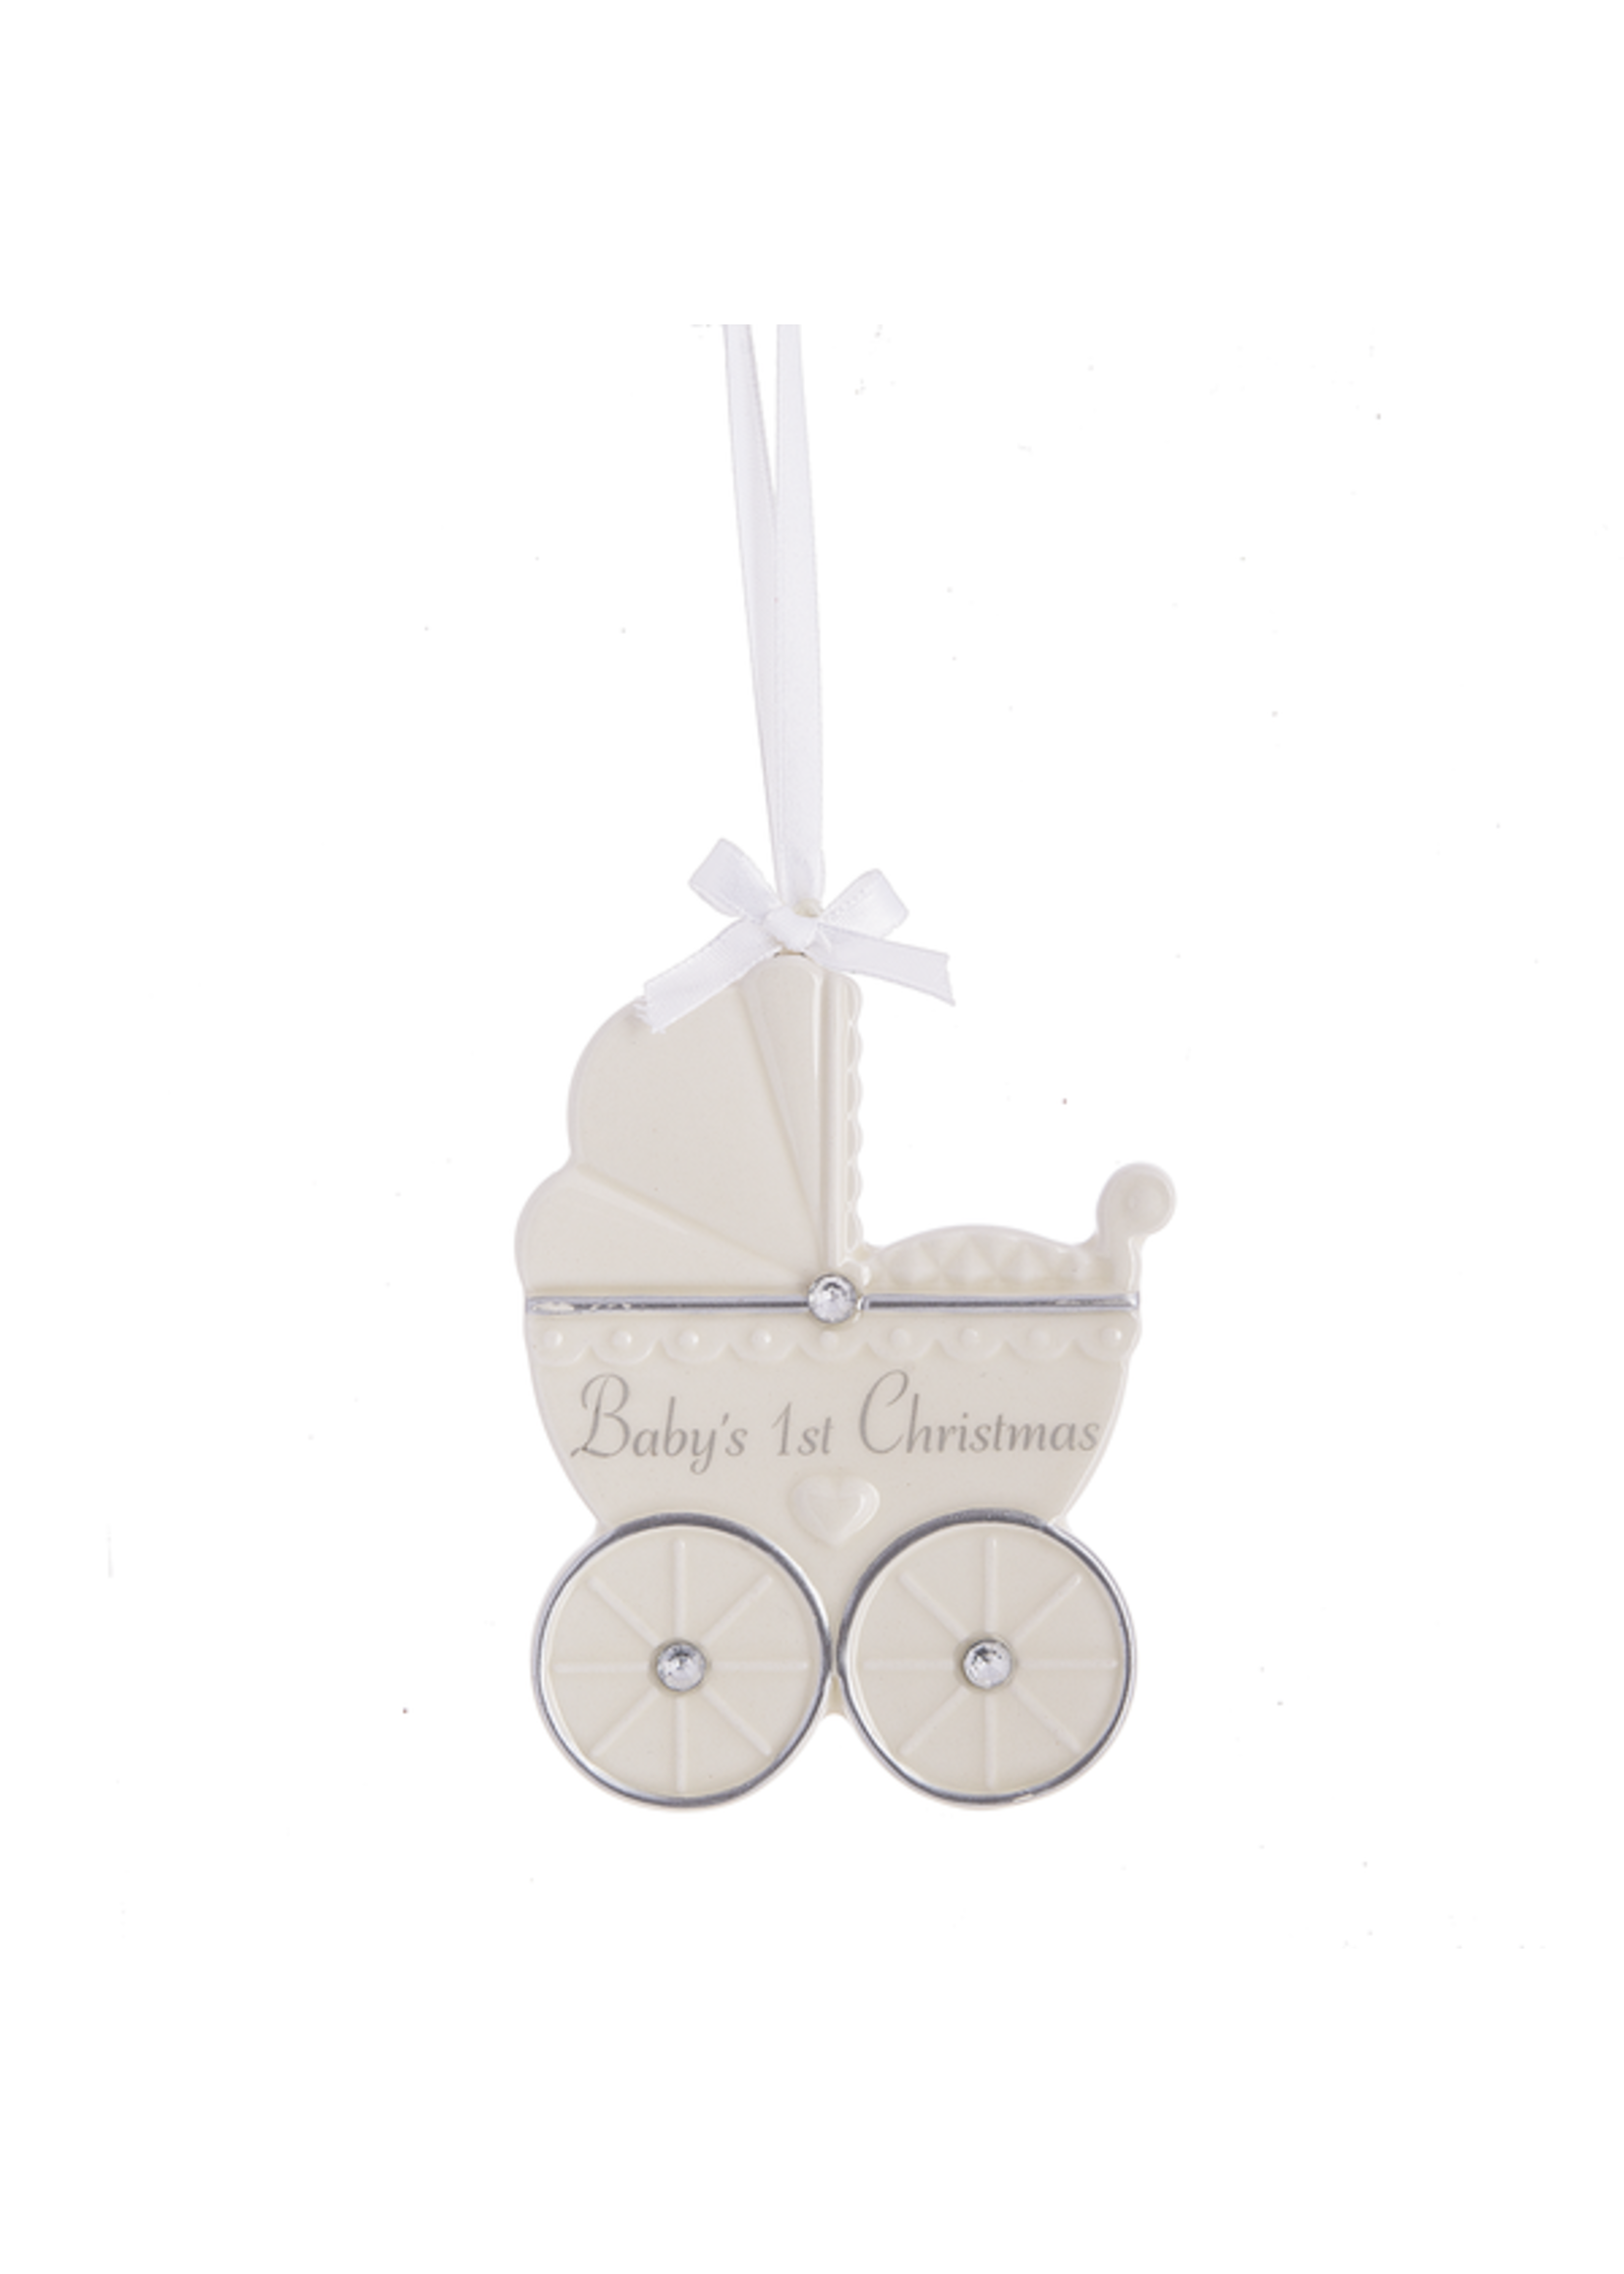 "Baby's 1st Christmas" Ornament